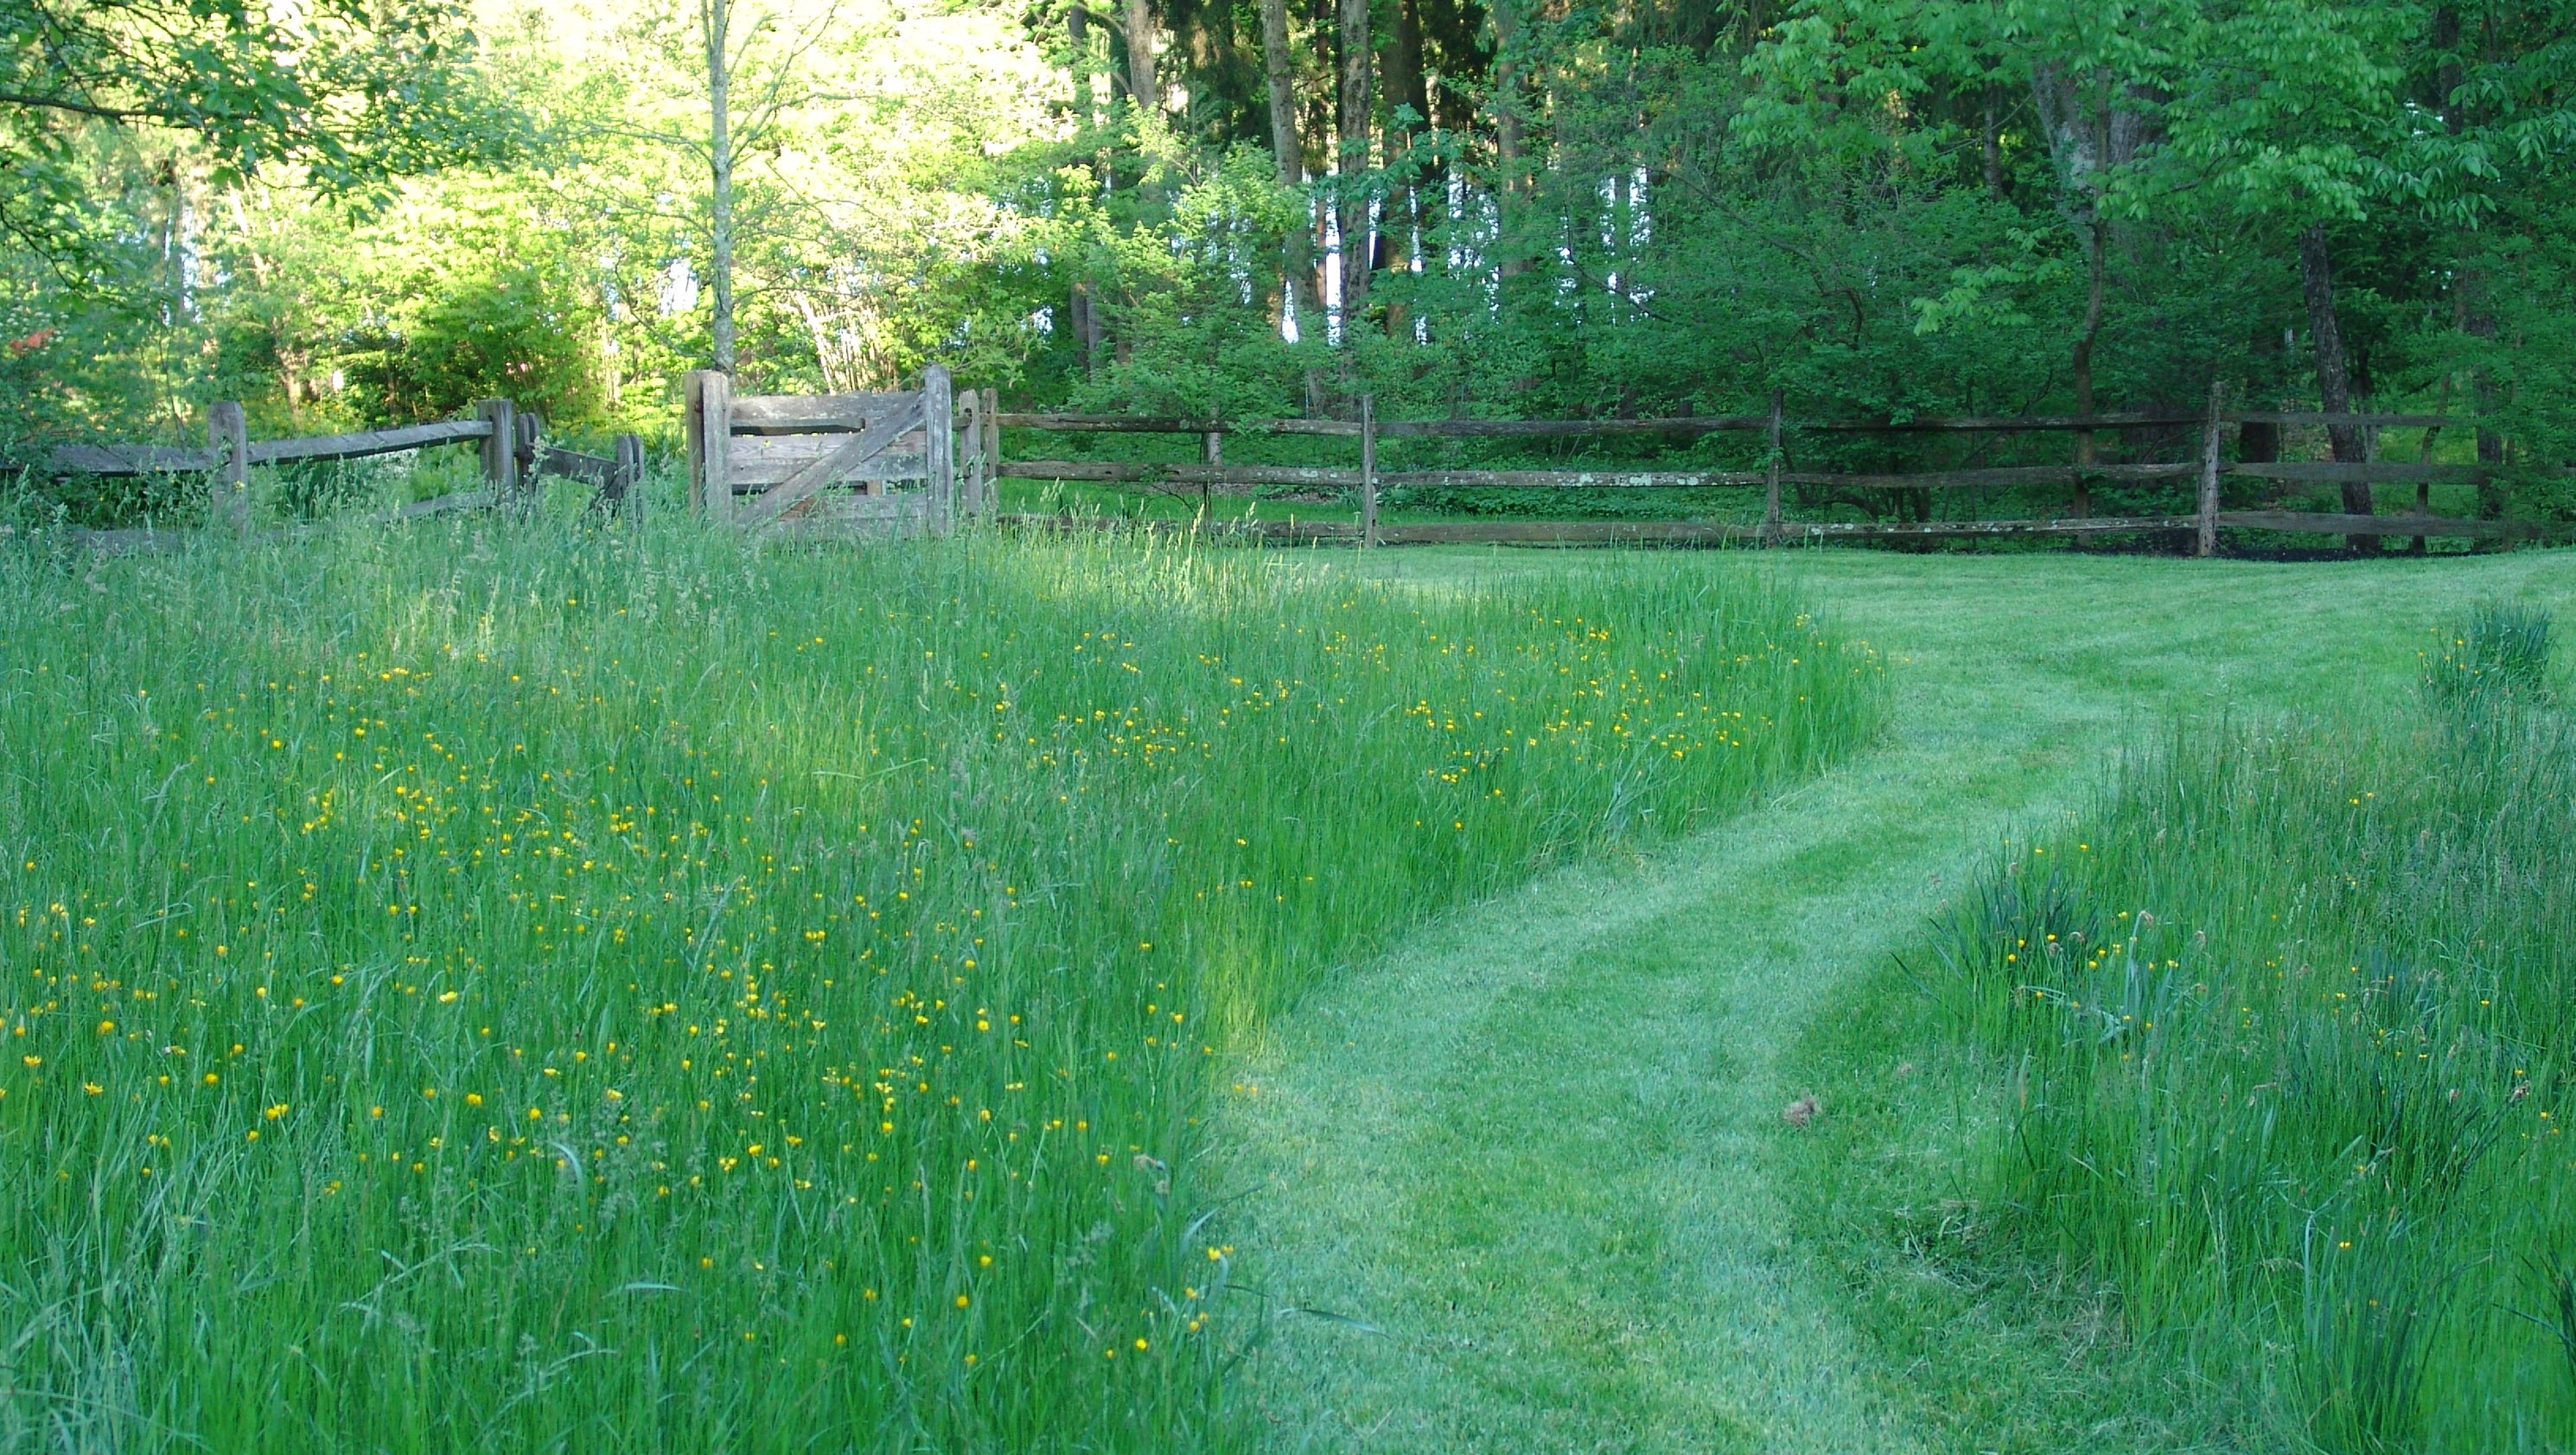 Maybe it's time for you to turn lawn into meadow